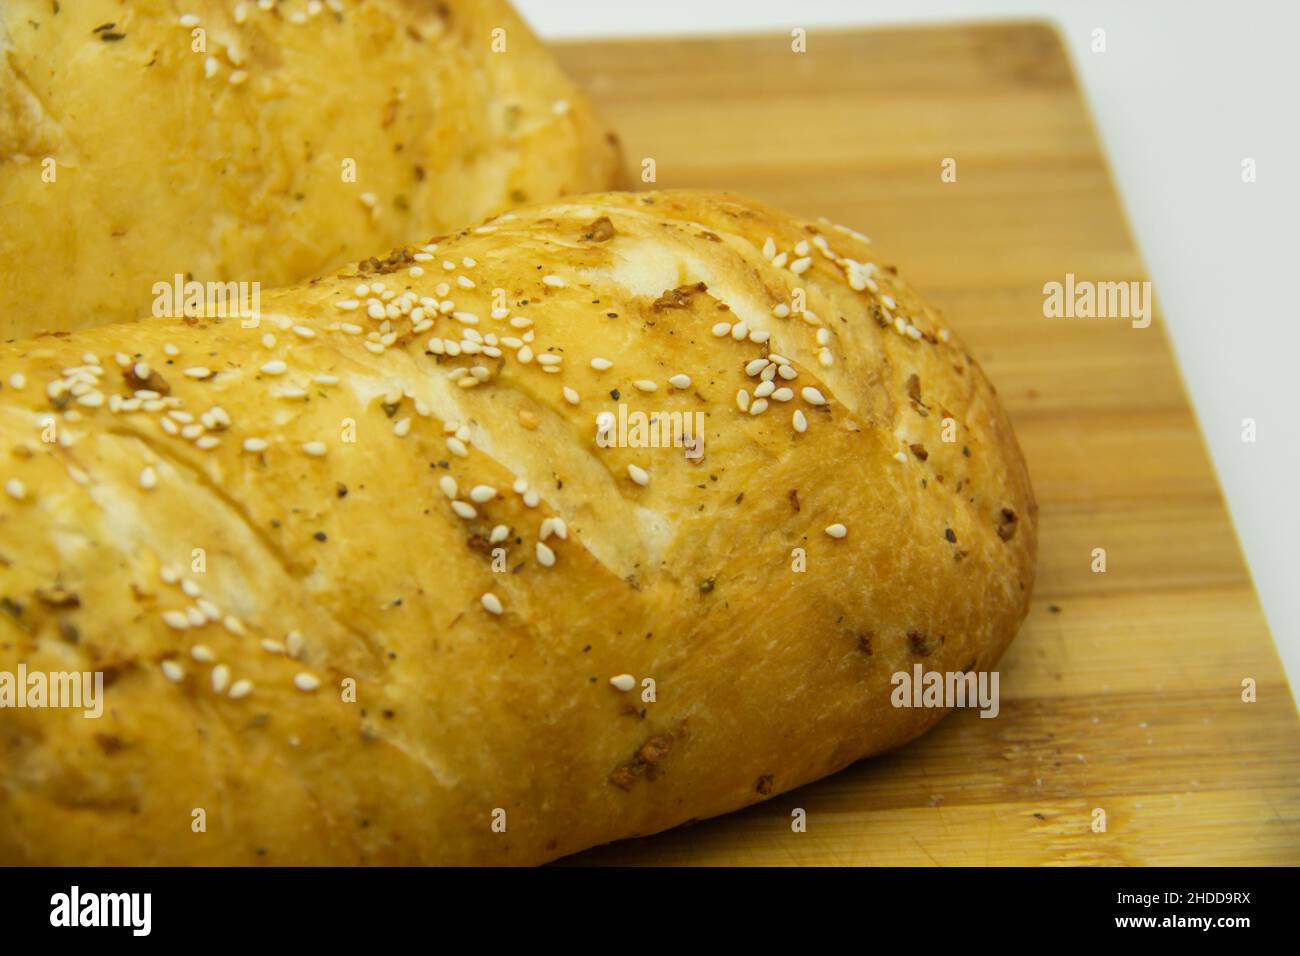 Wheat bread baked from flour at home. Tasty bread on wooden board  against background. Food with NO GMO. Homemade bread with spice on it. Stock Photo